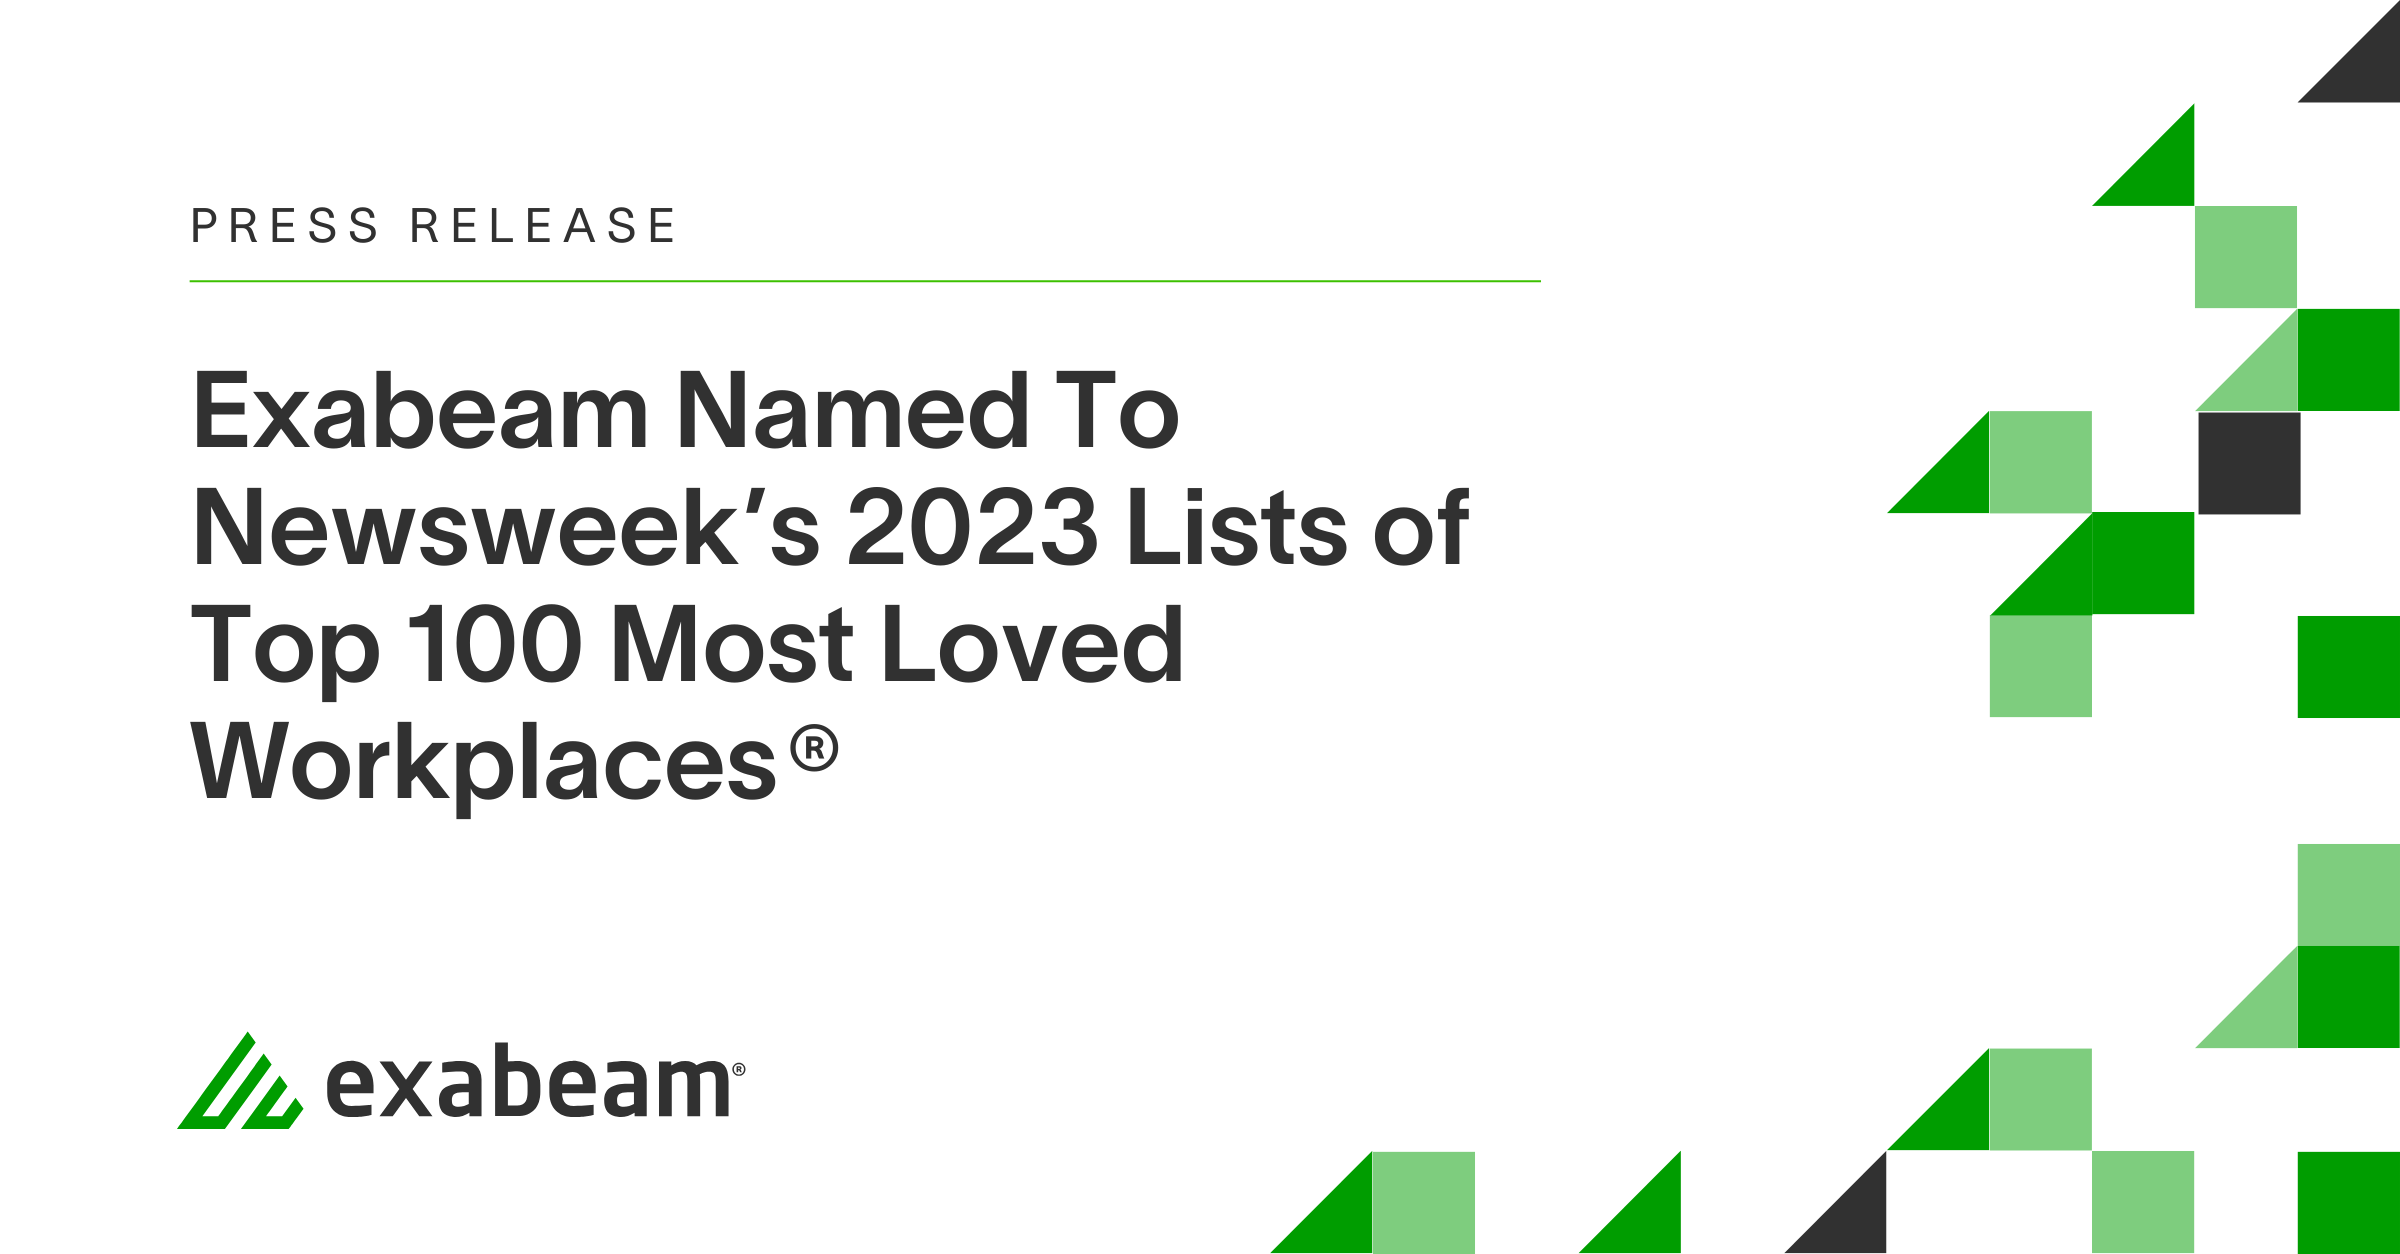 Exabeam Named To Newsweek’s 2023 Lists of Top 100 Most Loved Workplaces®